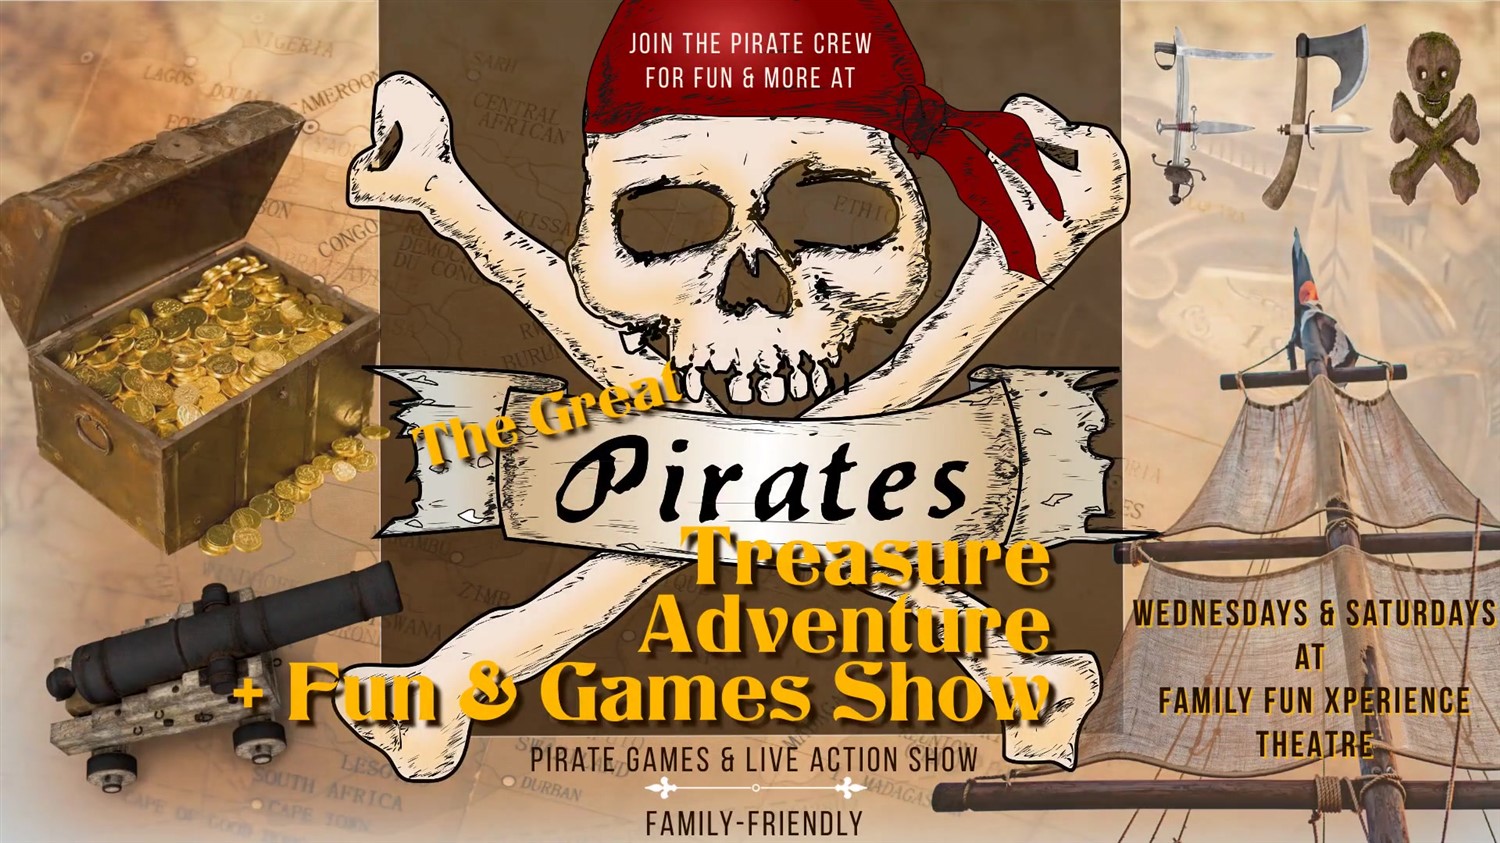 PIRATE ADVENTURE FUN & GAMES SHOW 5-Star Xperience with the Foggy FoX Pirates! on sep. 10, 19:00@FFX Theatre - Pick a seat, Buy tickets and Get information on Family Fun Xperience tickets.ffxshow.org